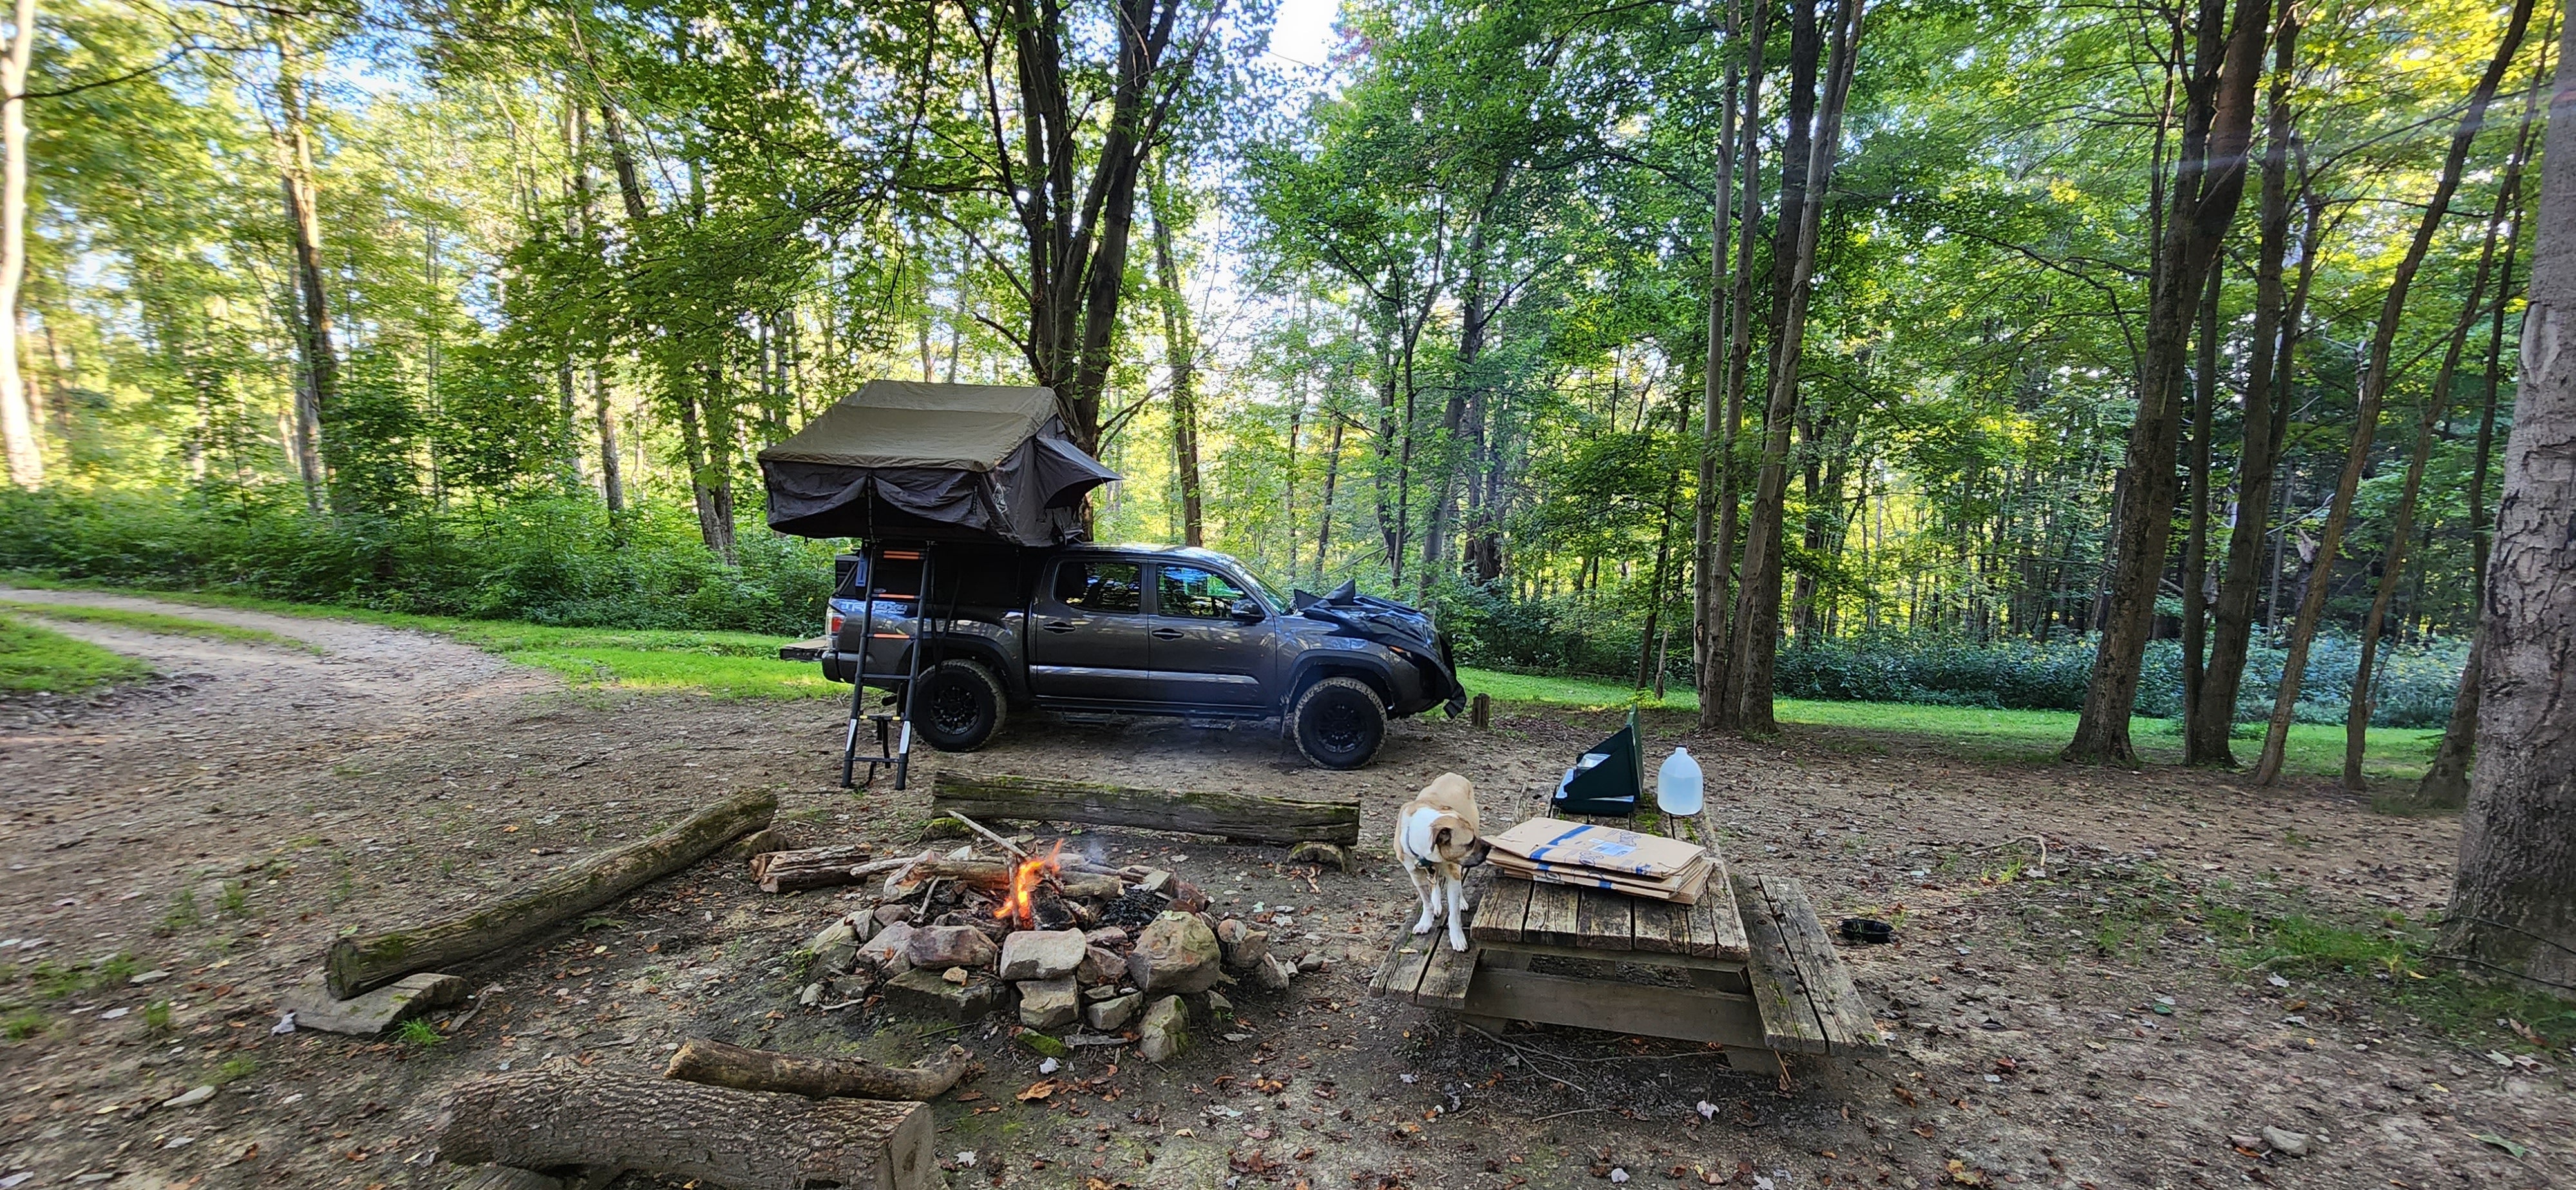 Camper submitted image from Indian Creek Camplands Inc - 2